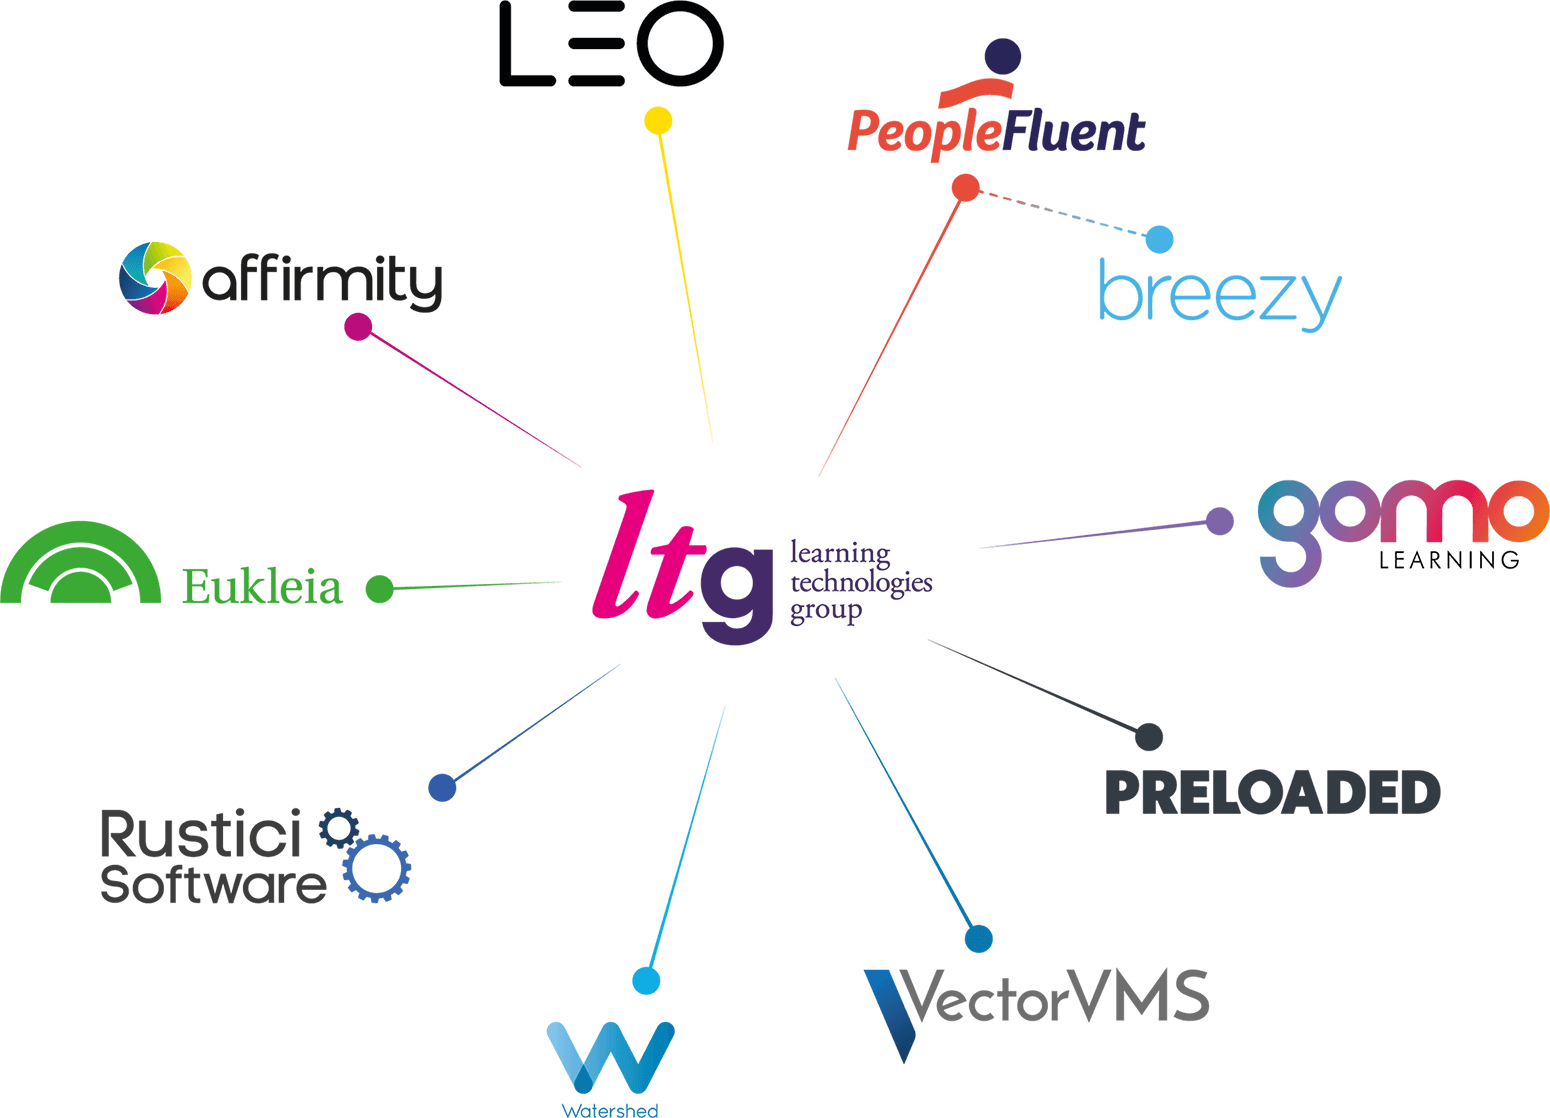 The LTG constellation of companies, including Breezy HR